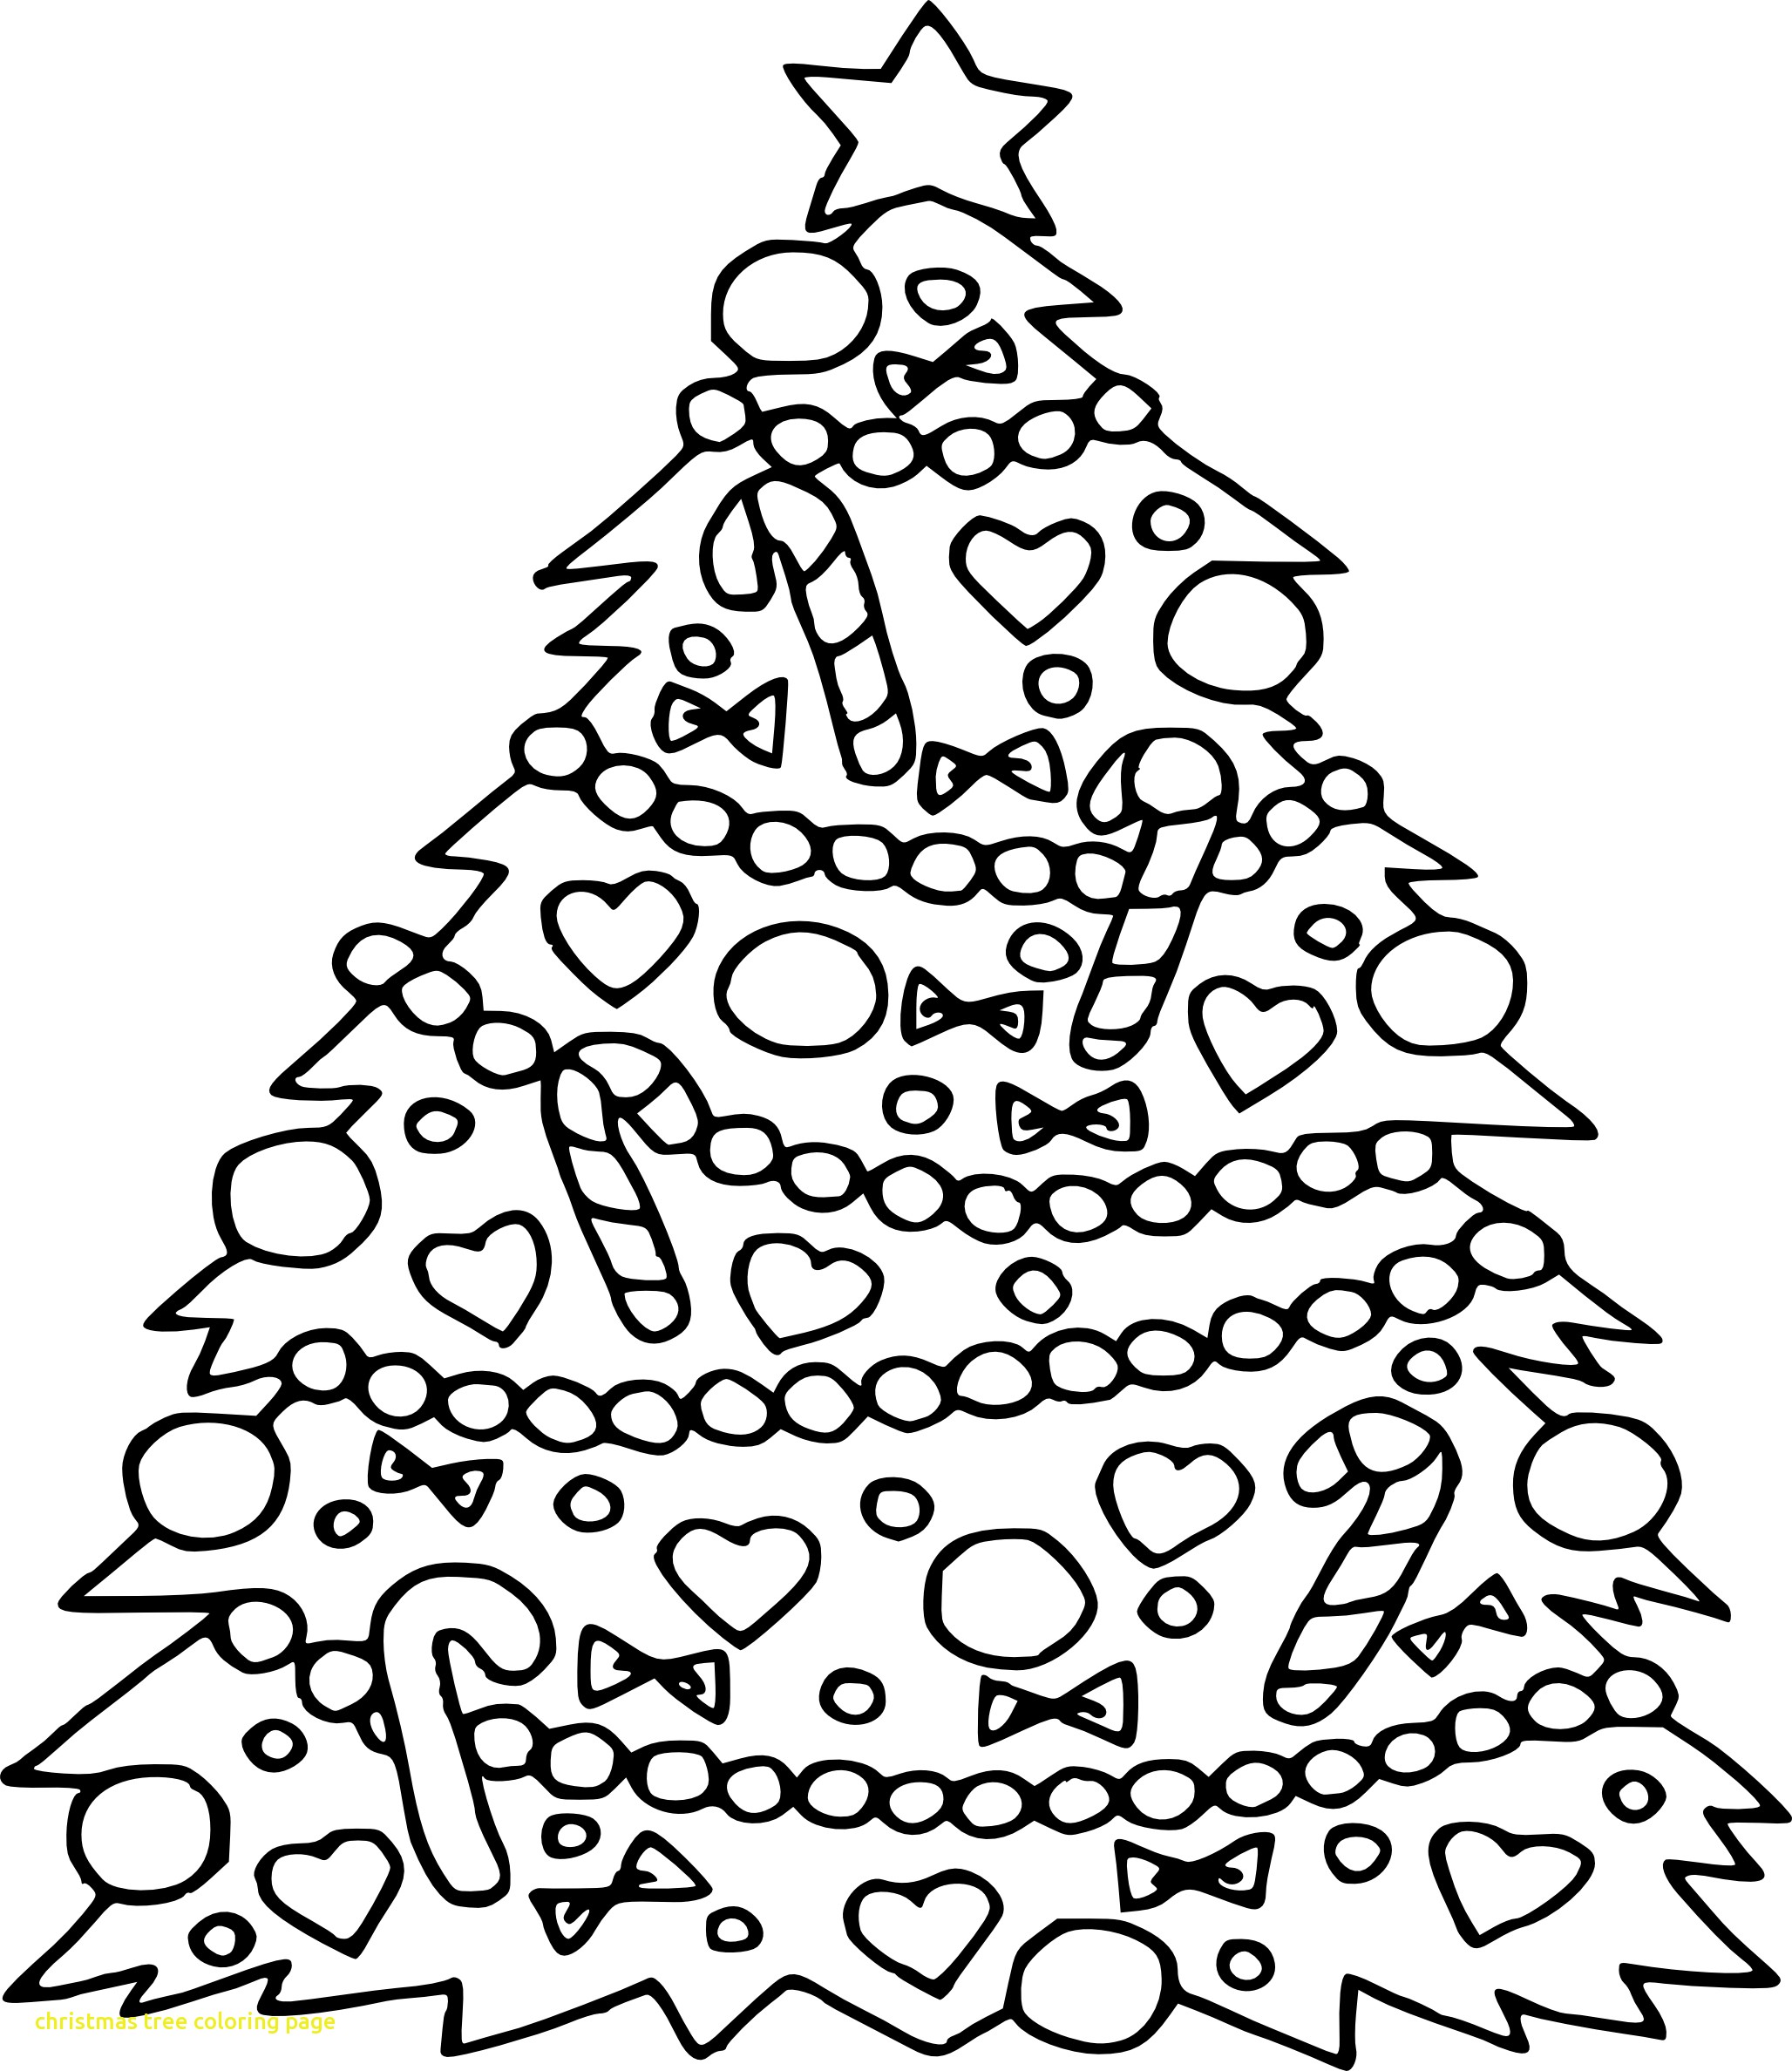 Pine Tree Coloring Page at Free printable colorings